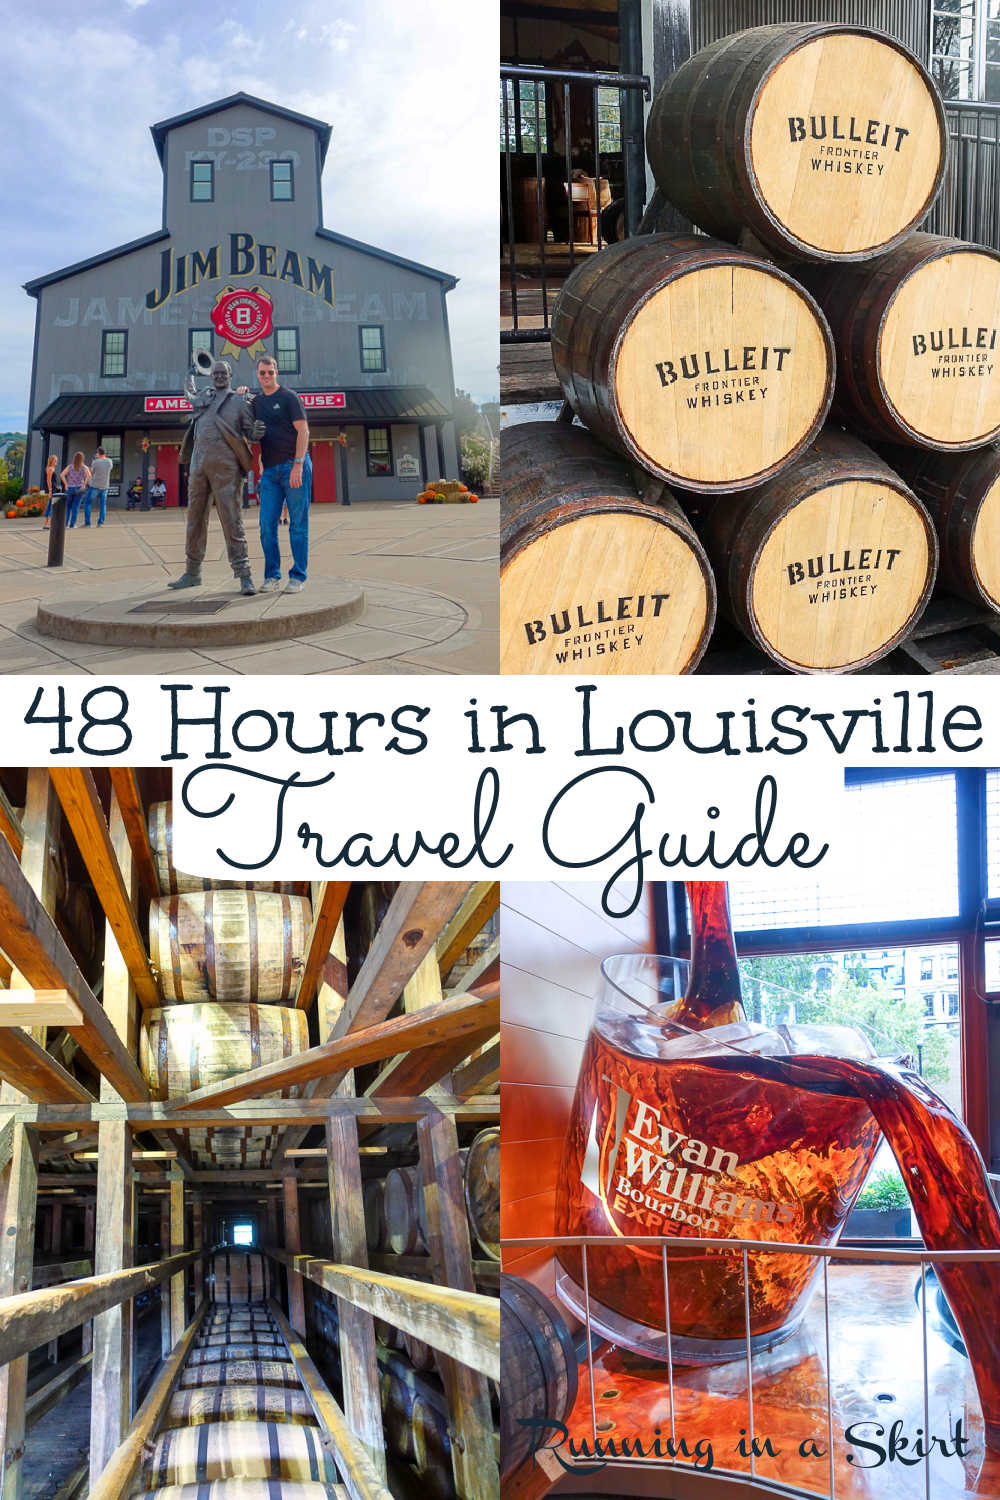 Things to Do in Louisville, Kentucky - Travel Guide for a weekend trip including what to do, restaurants - food and where to drink. Includes several top spots to stop along the nearby bourbon trail (Jim Beam, Evan Williams, Bulleit) including downtown distilleries. Also includes the Louisville Slugger Museum, Kentucky Bourbon Tour & Kentucky Derby for the best 48 hours in Louisville! / Running in a Skirt #kentucky #kentuckytravel #kentuckybourbon #bourbontrail #bourbon #travelguide #ustravel via @juliewunder